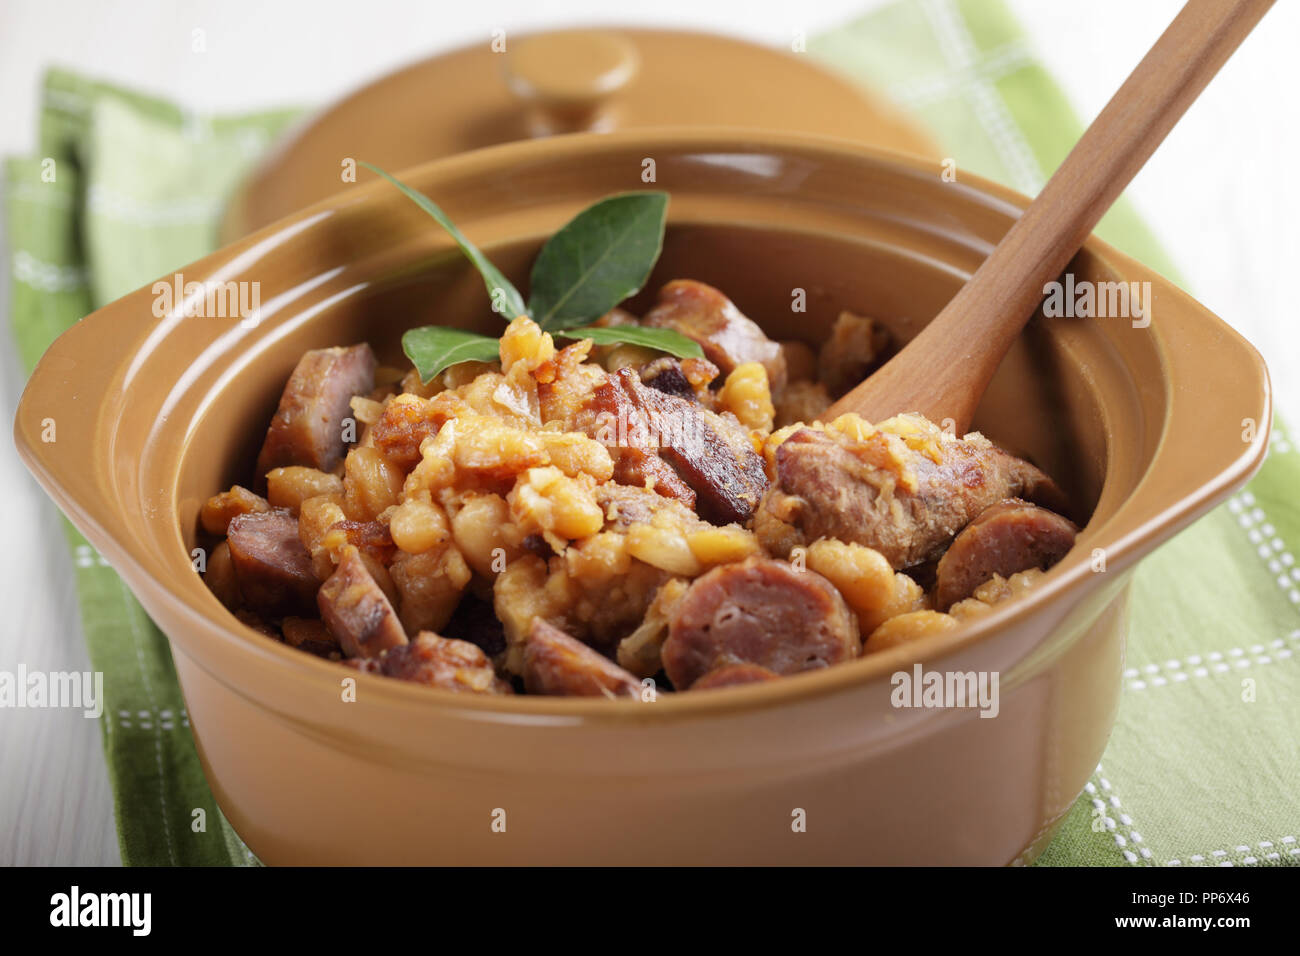 Cassoulet with goose meat, pork sausage, and beans in the pot Stock Photo